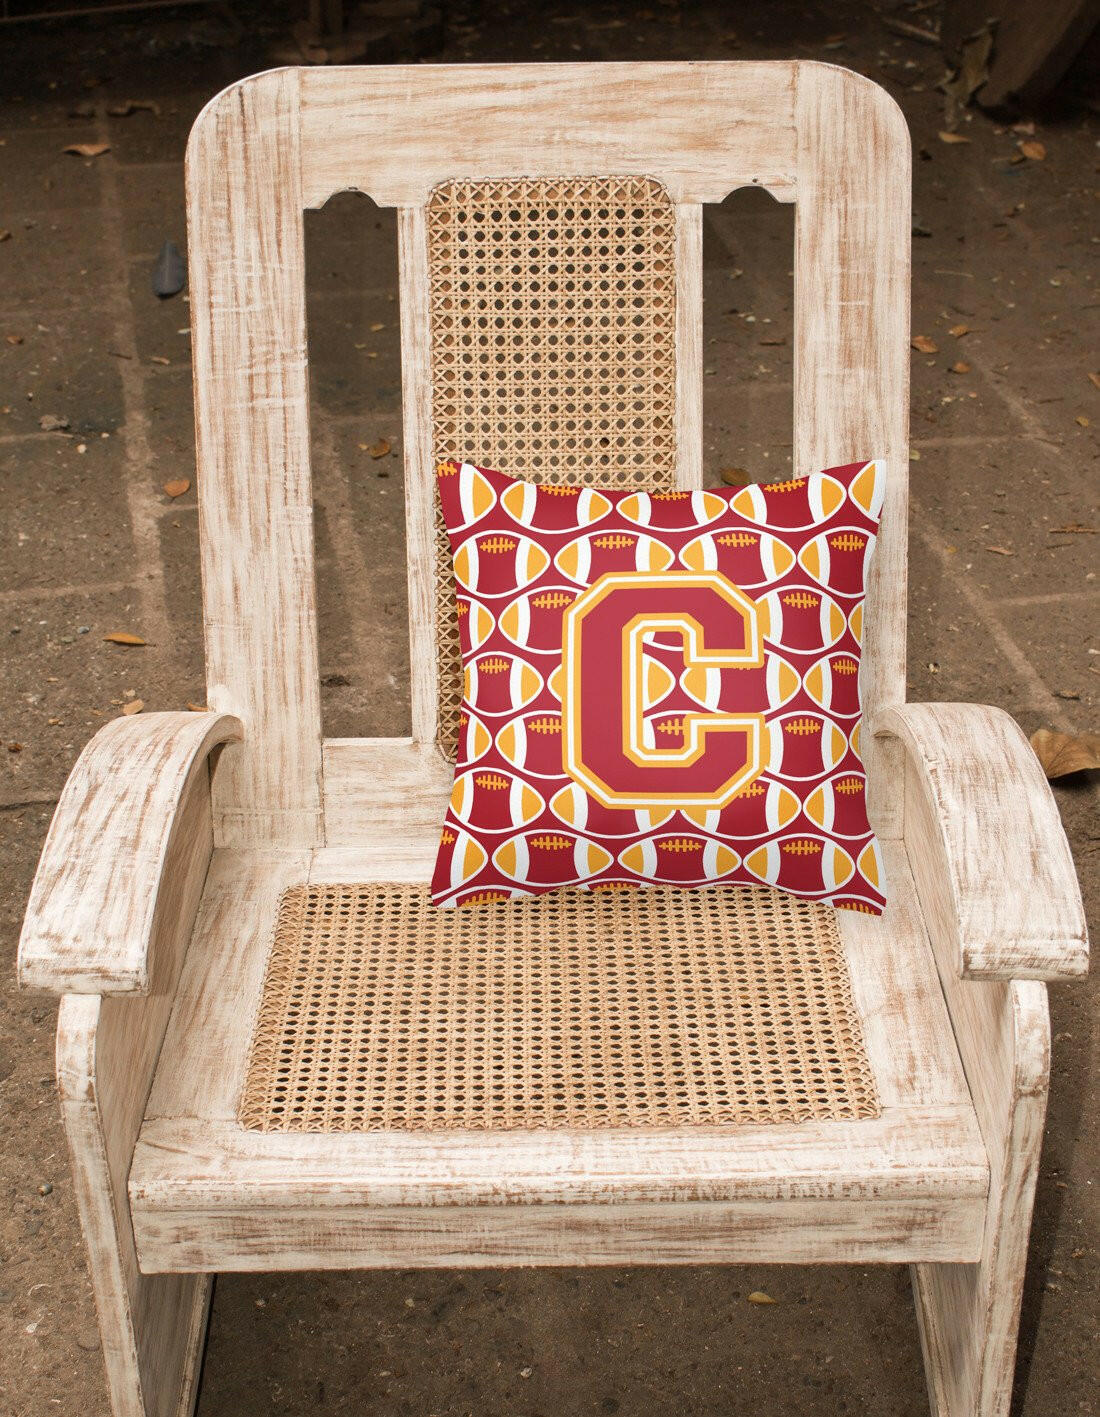 Letter C Football Cardinal and Gold Fabric Decorative Pillow CJ1070-CPW1414 by Caroline's Treasures